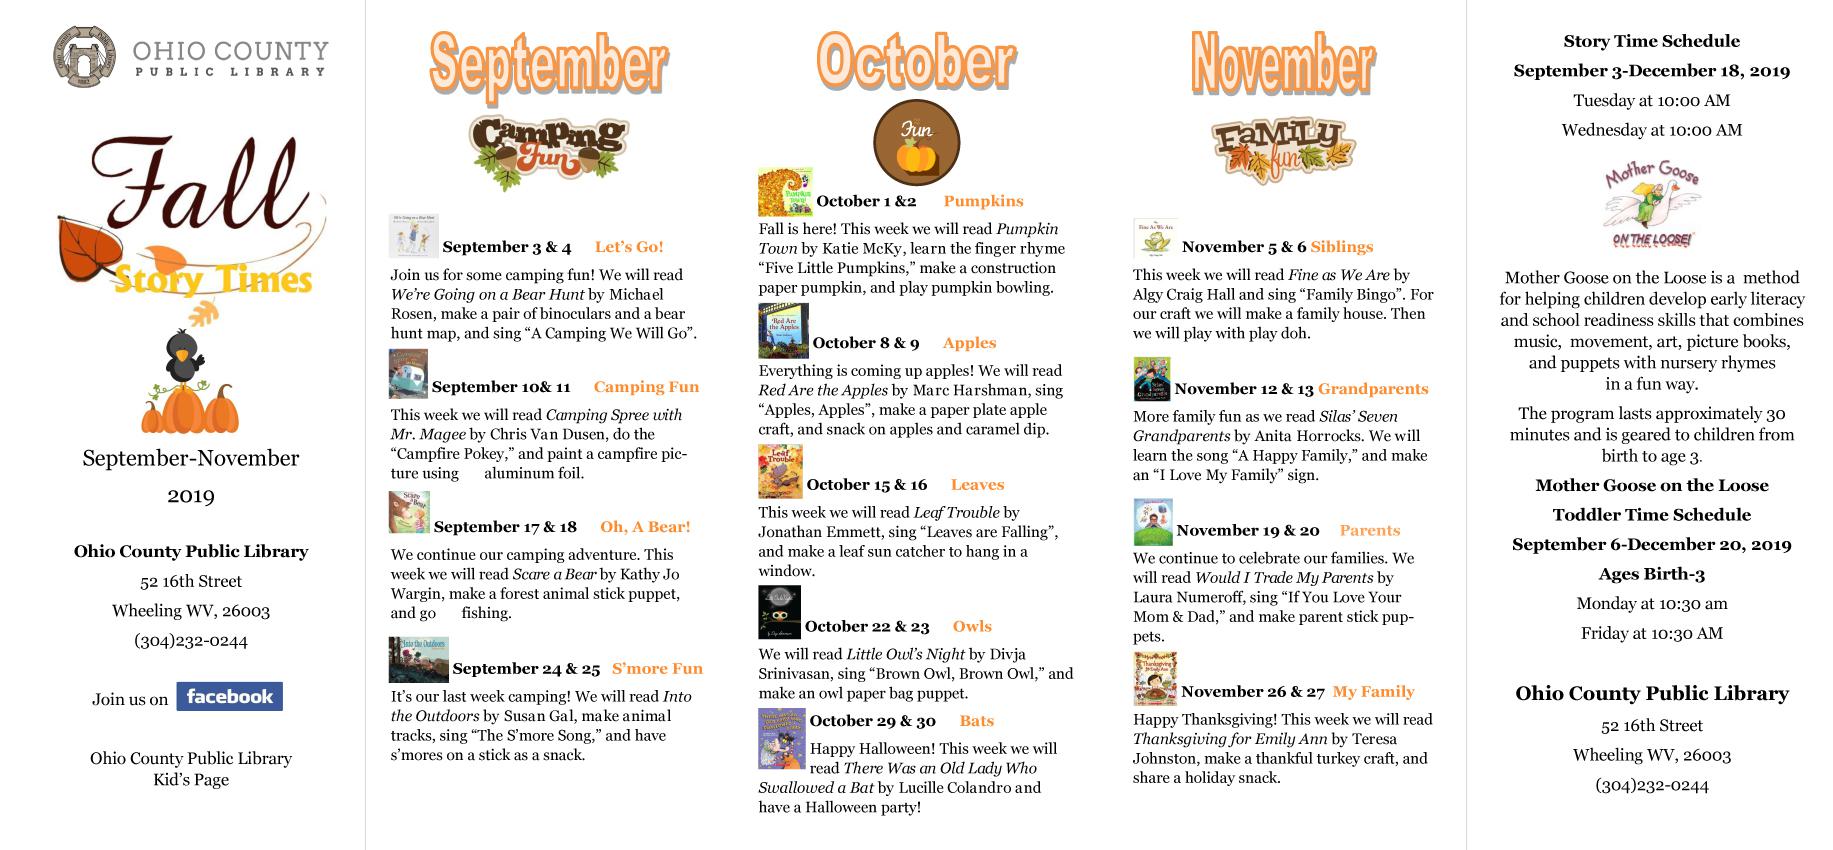 OCPL Story Time Schedule - Fall 2019